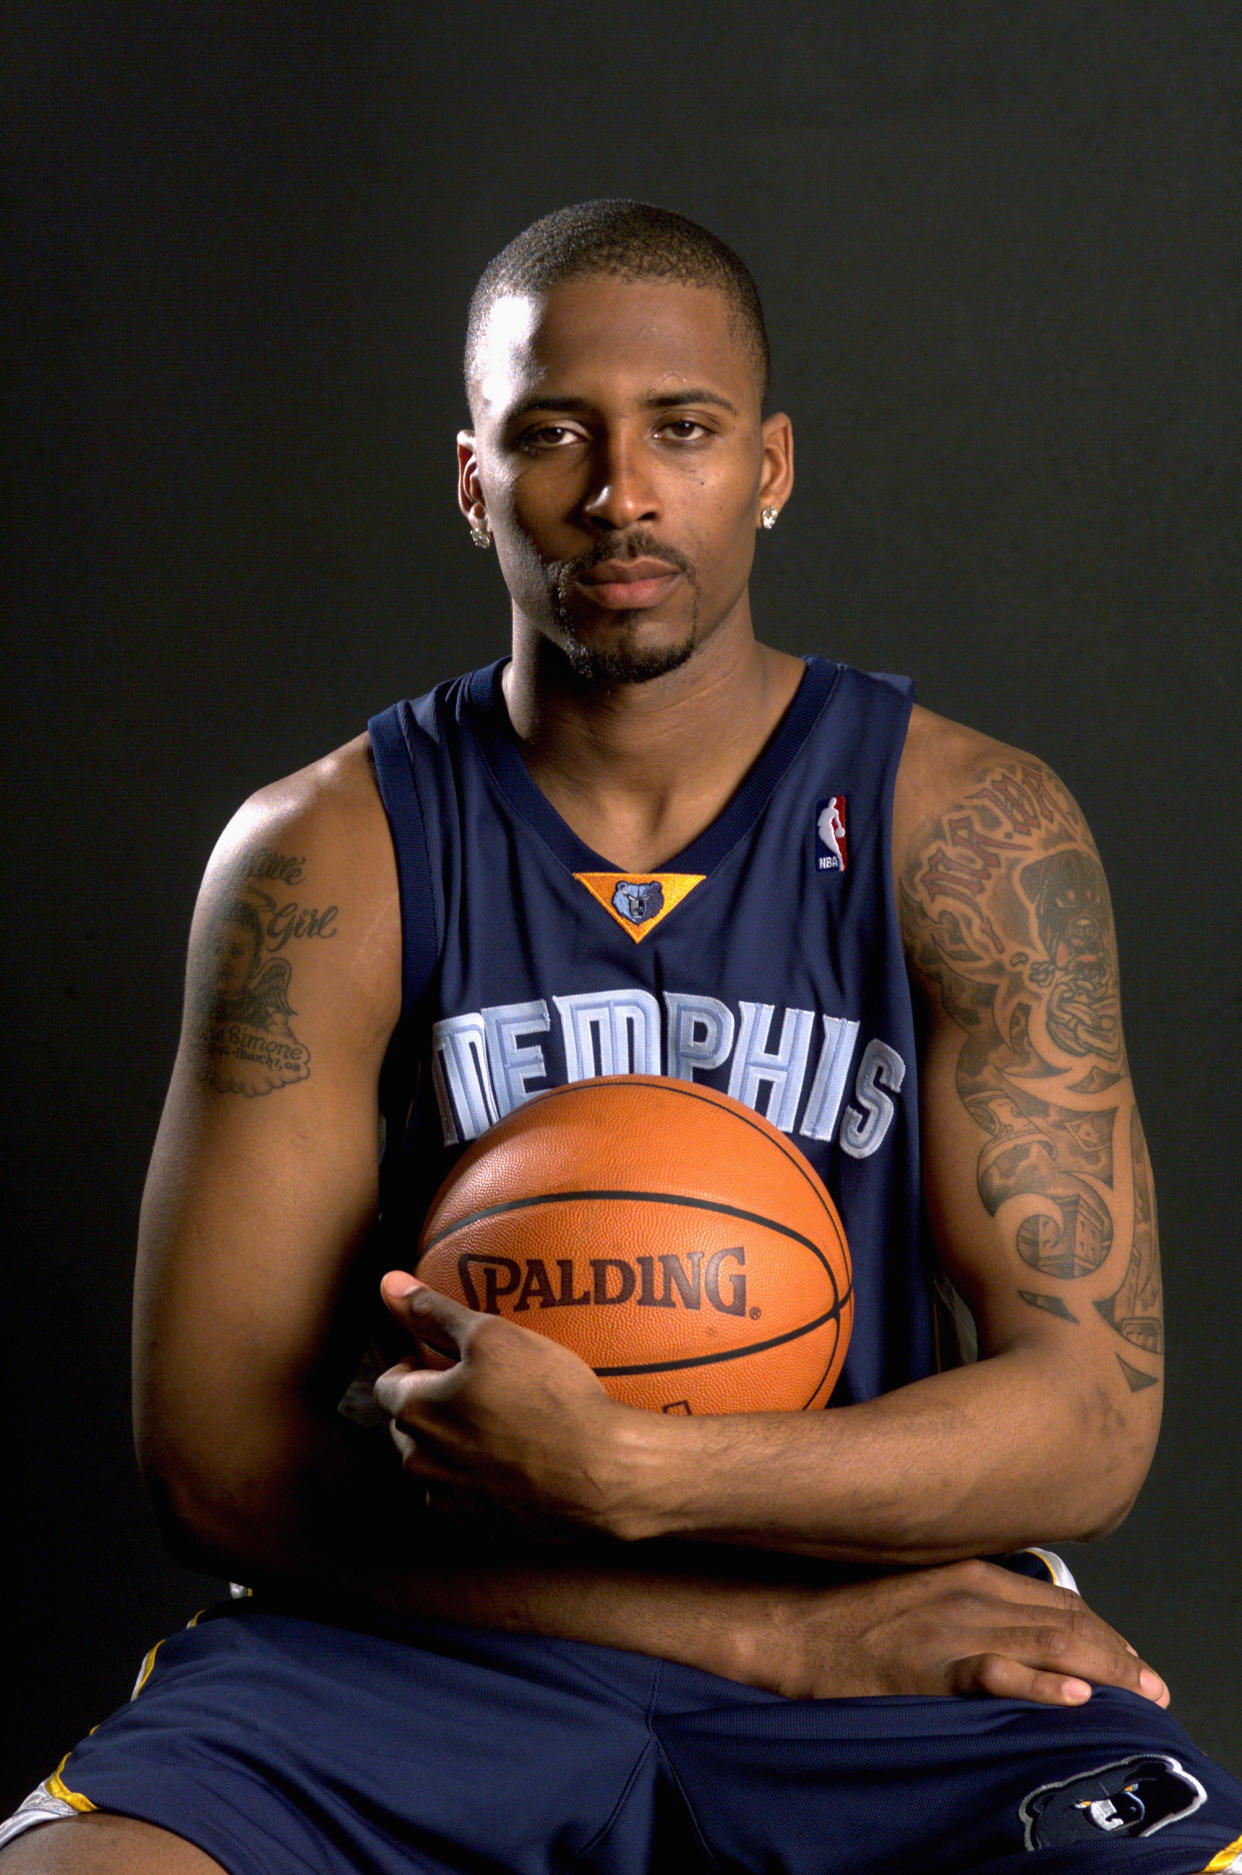 Lorenzen Wright #42 of the Memphis Grizzlies poses in the new uniforms for the 2004–2005 season on June 15, 2004 in Memphis. - Credit: Joe Murphy/NBAE via Getty Images